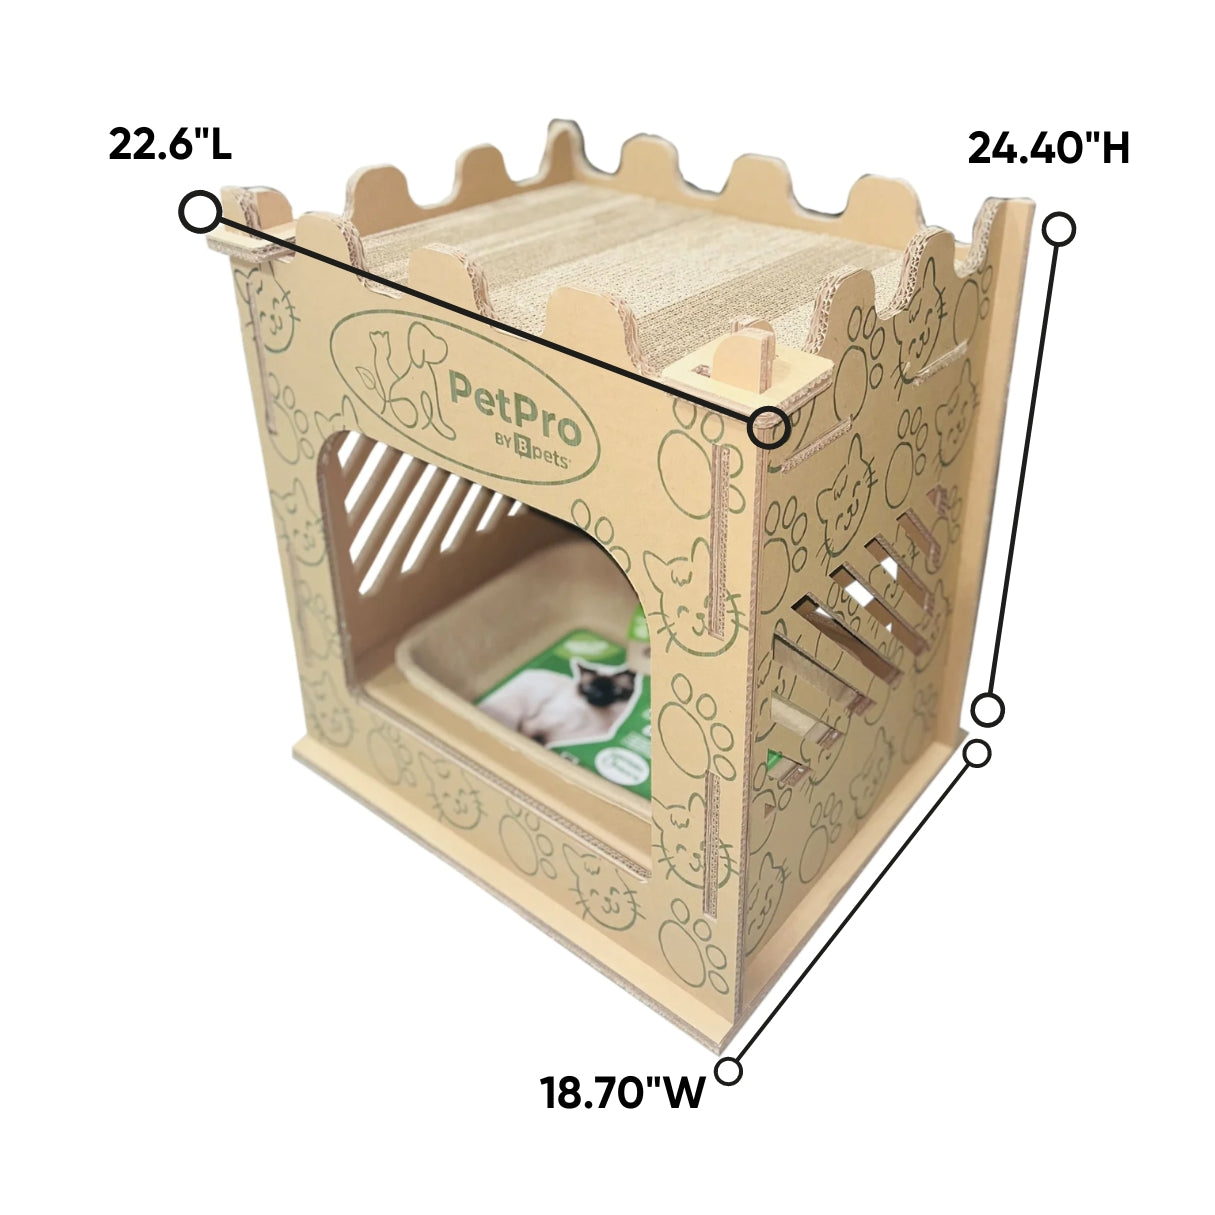 Bpets Royal Retreat: Castle Cat Litter House, Premium Corrugated Cardboard, Double-Layer Scratcher, Indoor Litter Tray, Disposable Scoop (Eco-Friendly Cat House, Litter Box, Cardboard Cat Scratcher)